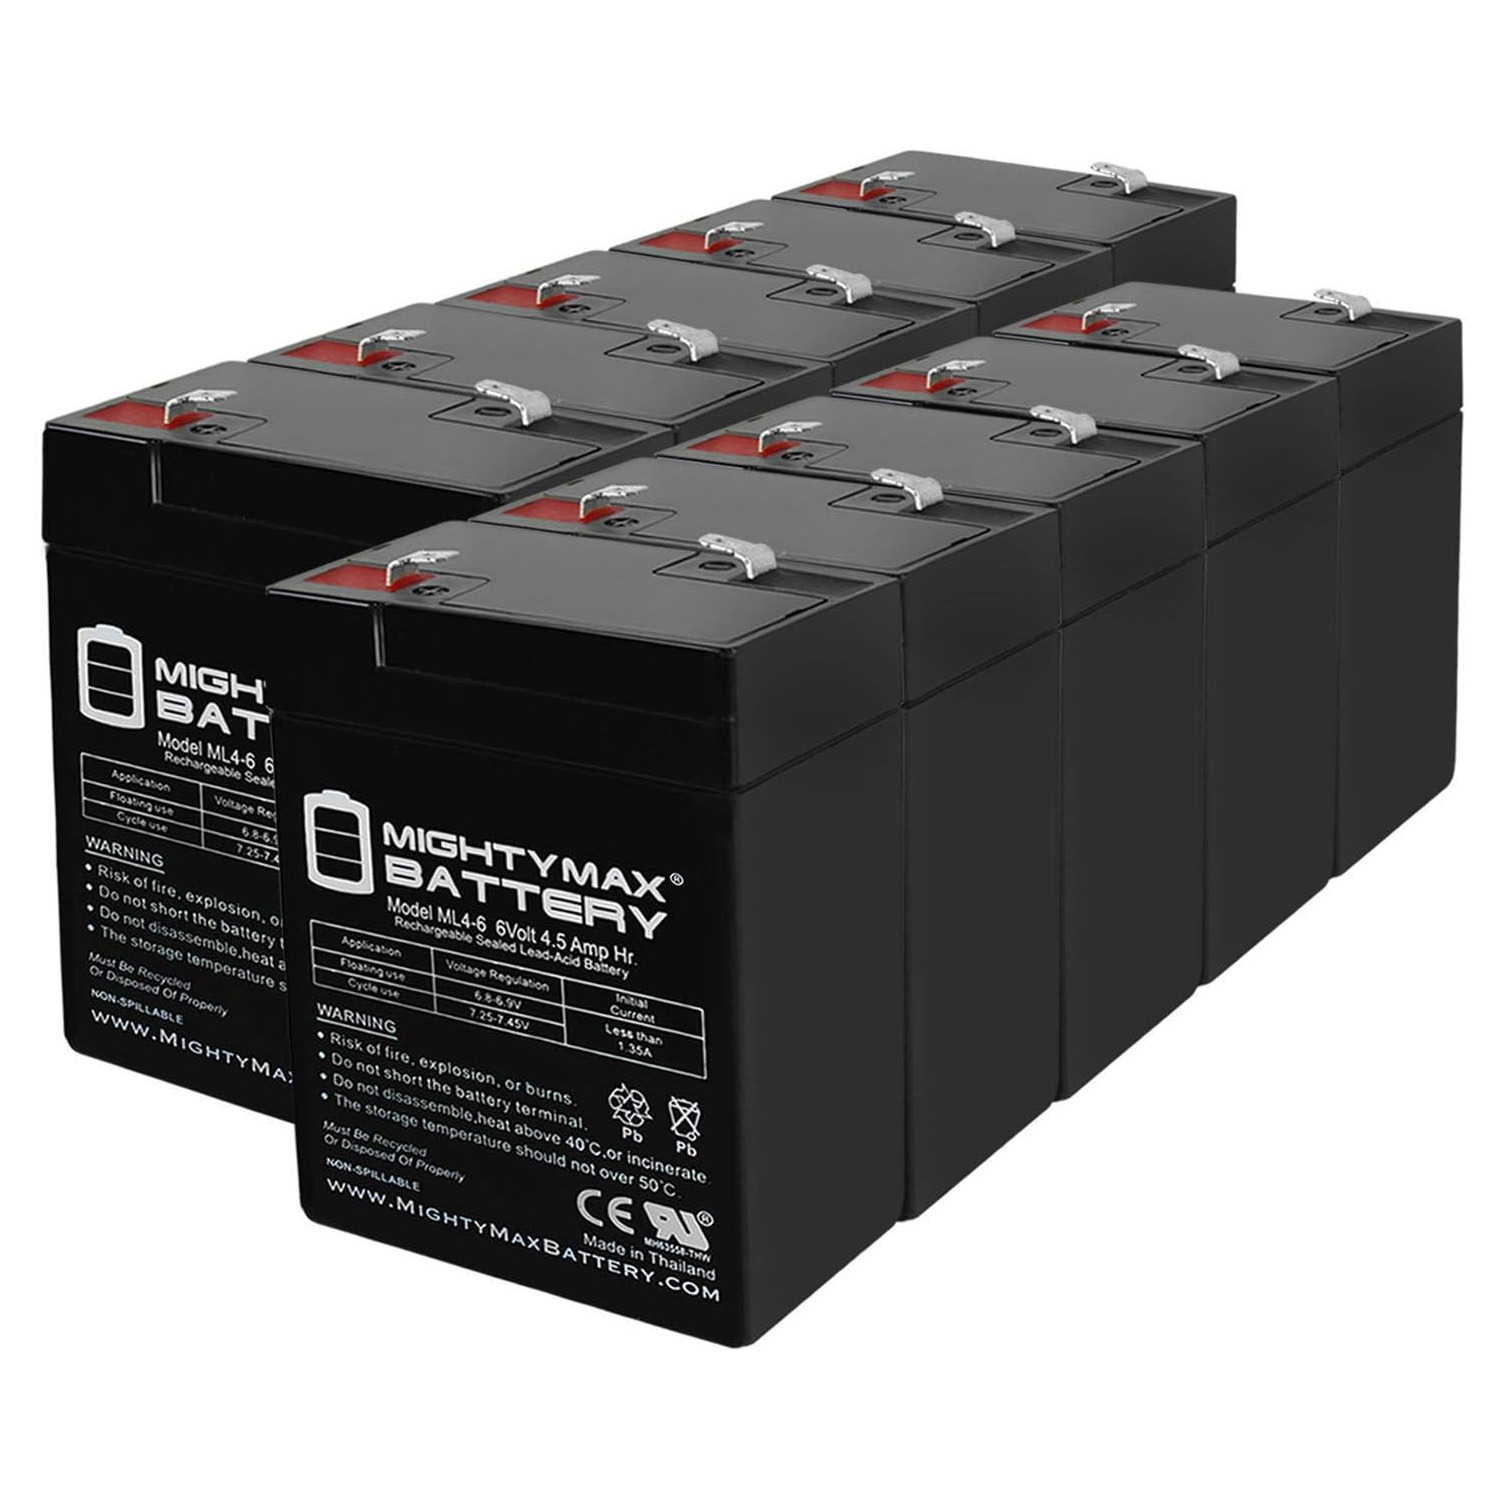 6V 4.5AH SLA Replacement Battery for Astralite EU-3 - 10 Pack